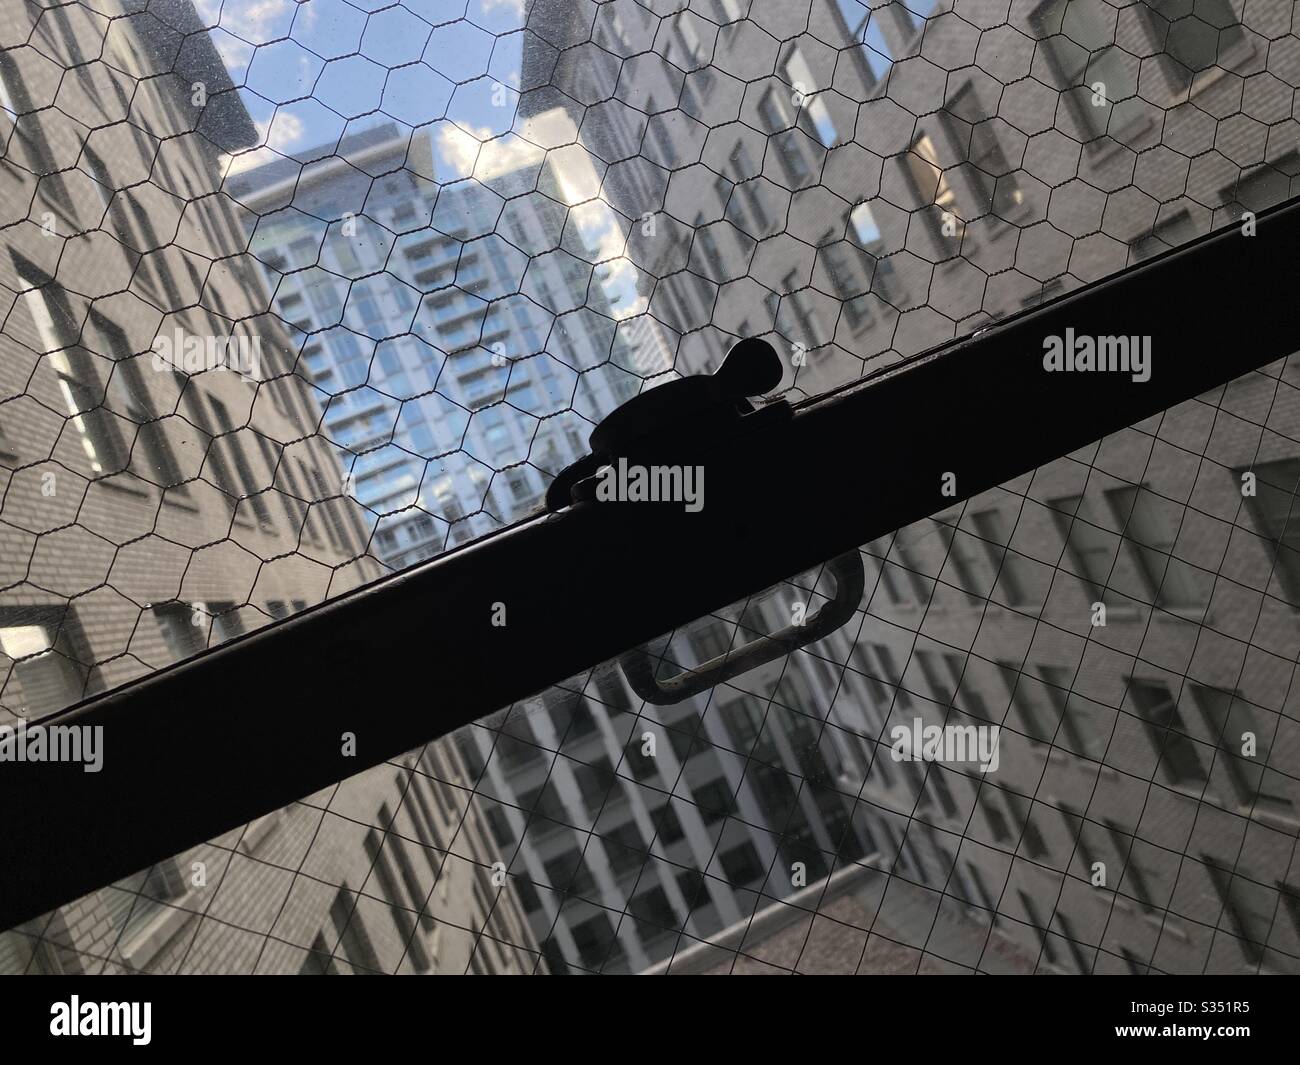 LOS ANGELES, CA, MAR 2020: angled view of apartment building windows, in soft focus, seen through wire mesh of safety glass, focus on foreground and silhouetted window lock Stock Photo